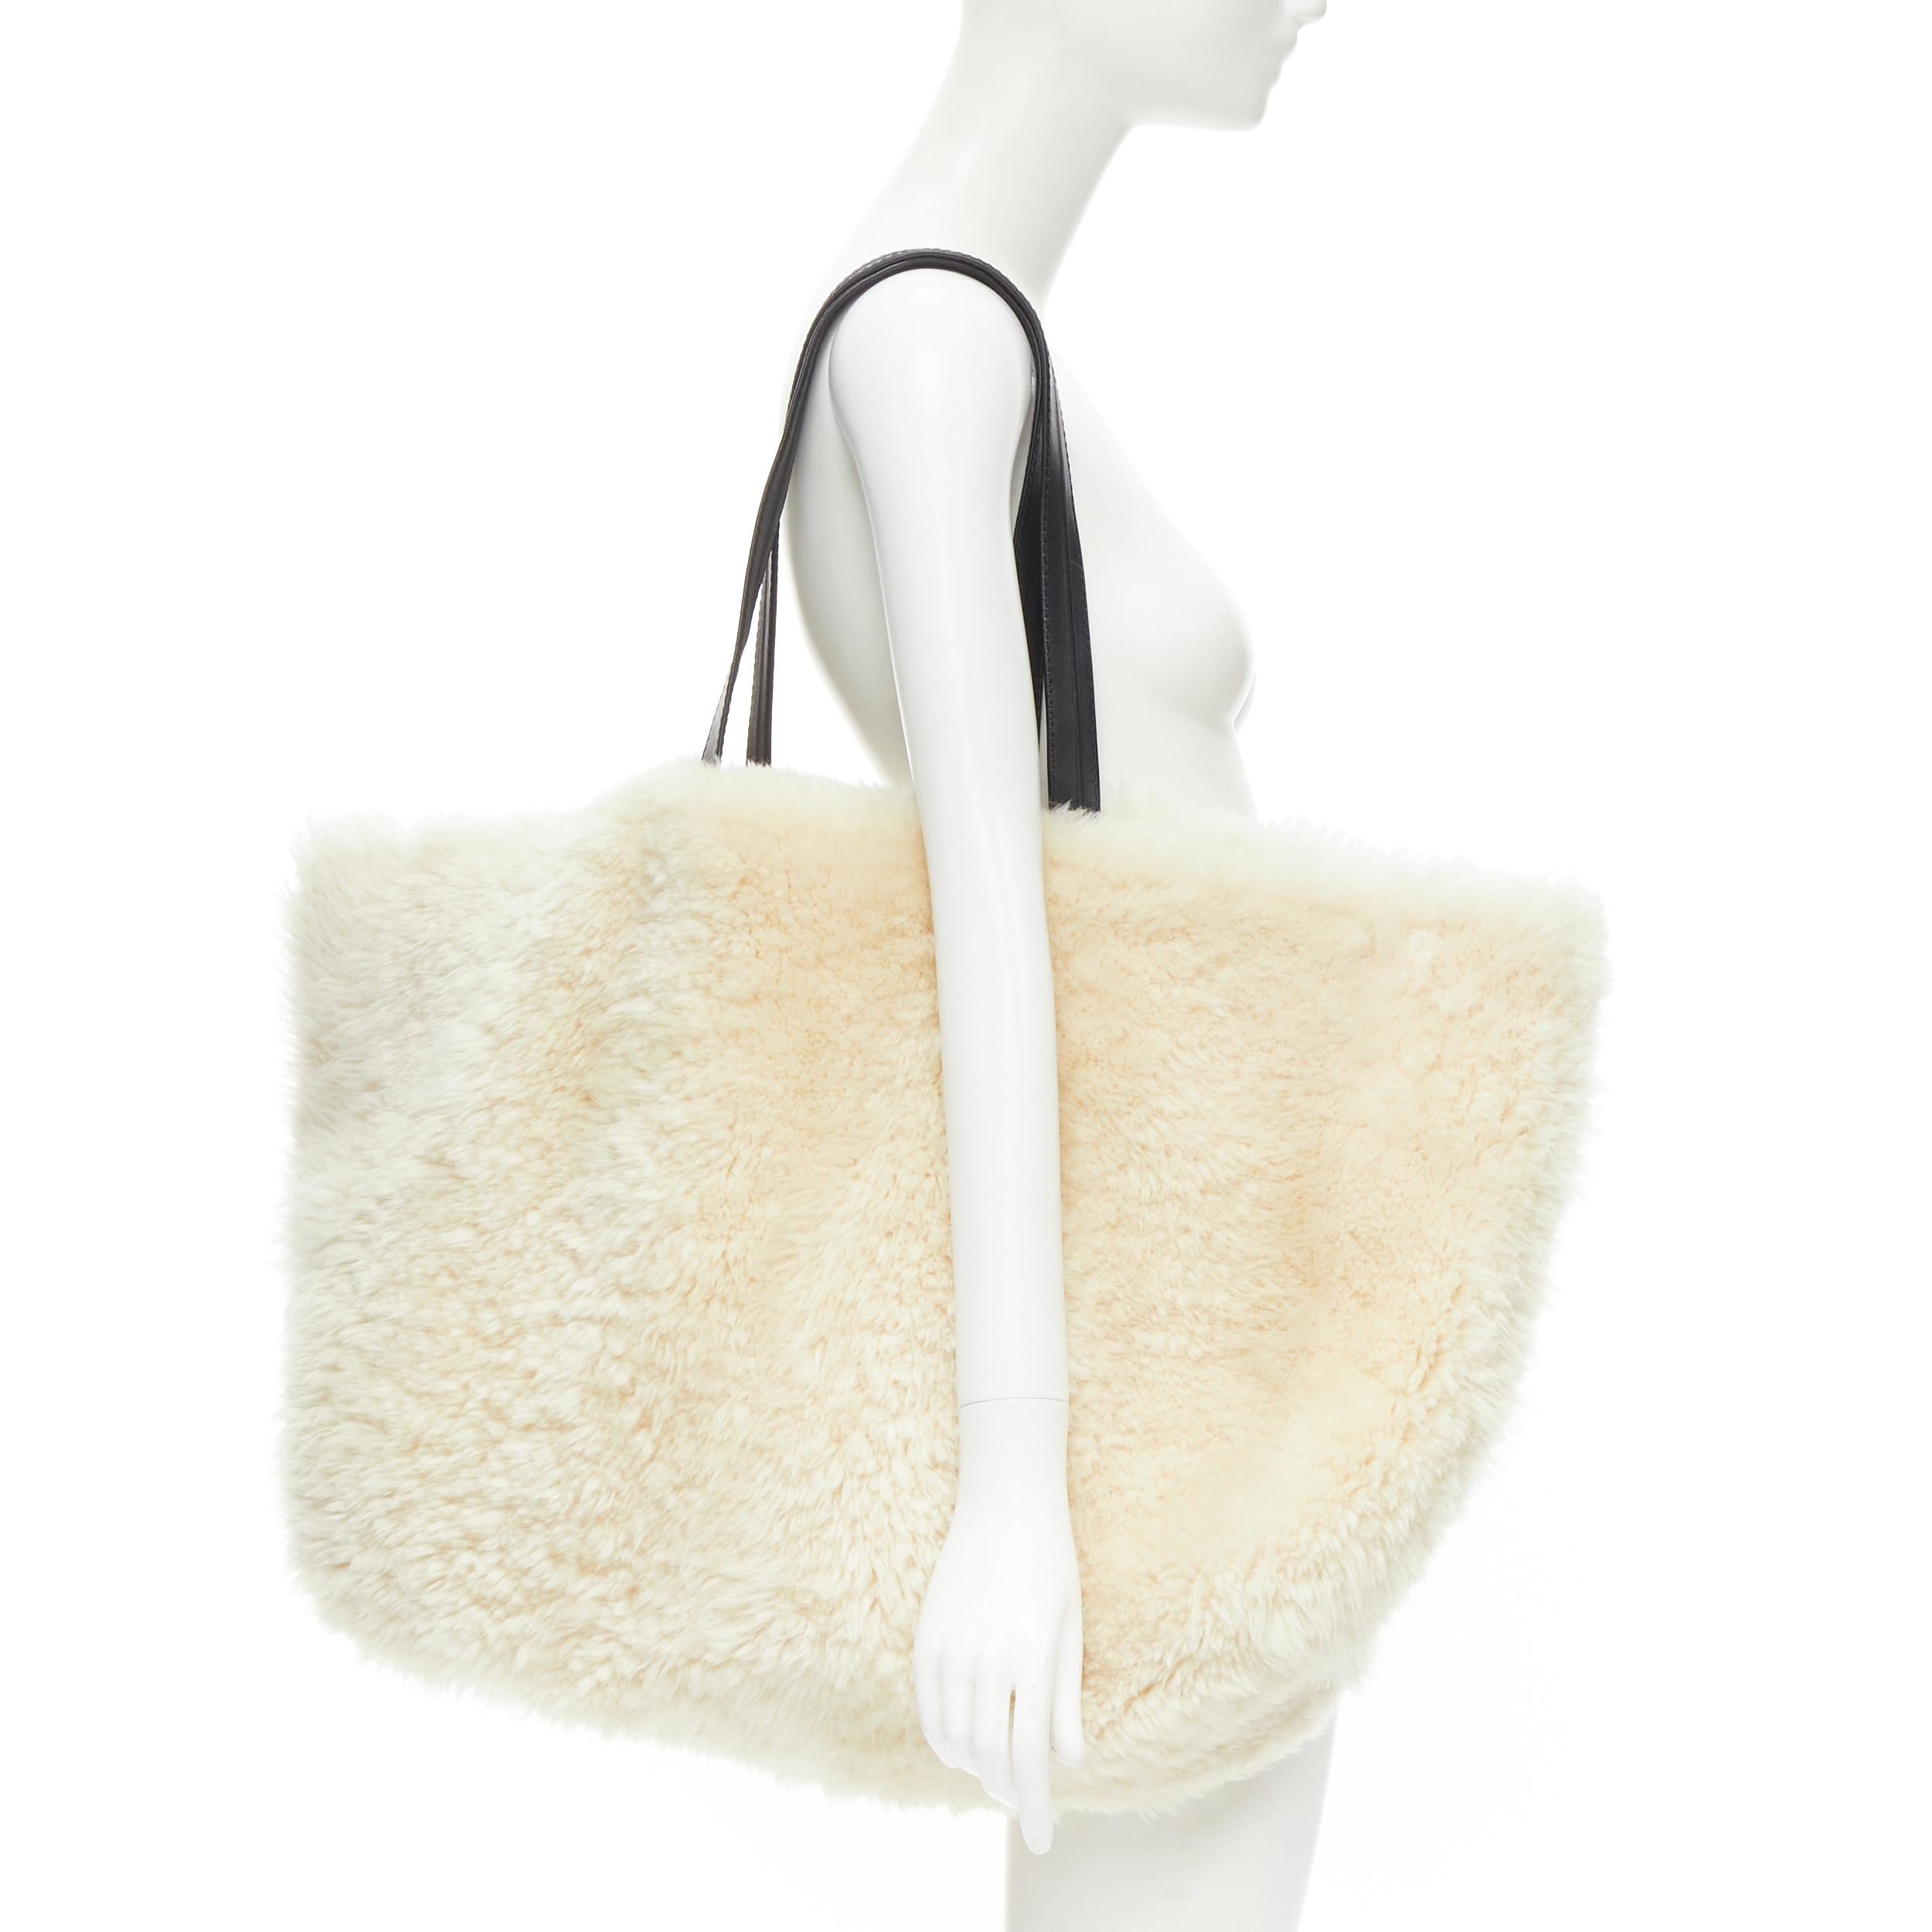 new PETER DO 2019 peach beige soft shearling fur oversized leather bag 
Reference: LNKO/A01834 
Brand: Peter Do 
Designer: Peter Do 
Model: Shearling bag 
Material: SHearling 
Color: Beige 
Pattern: Solid 
Extra Detail: Oversized tote. Single wall